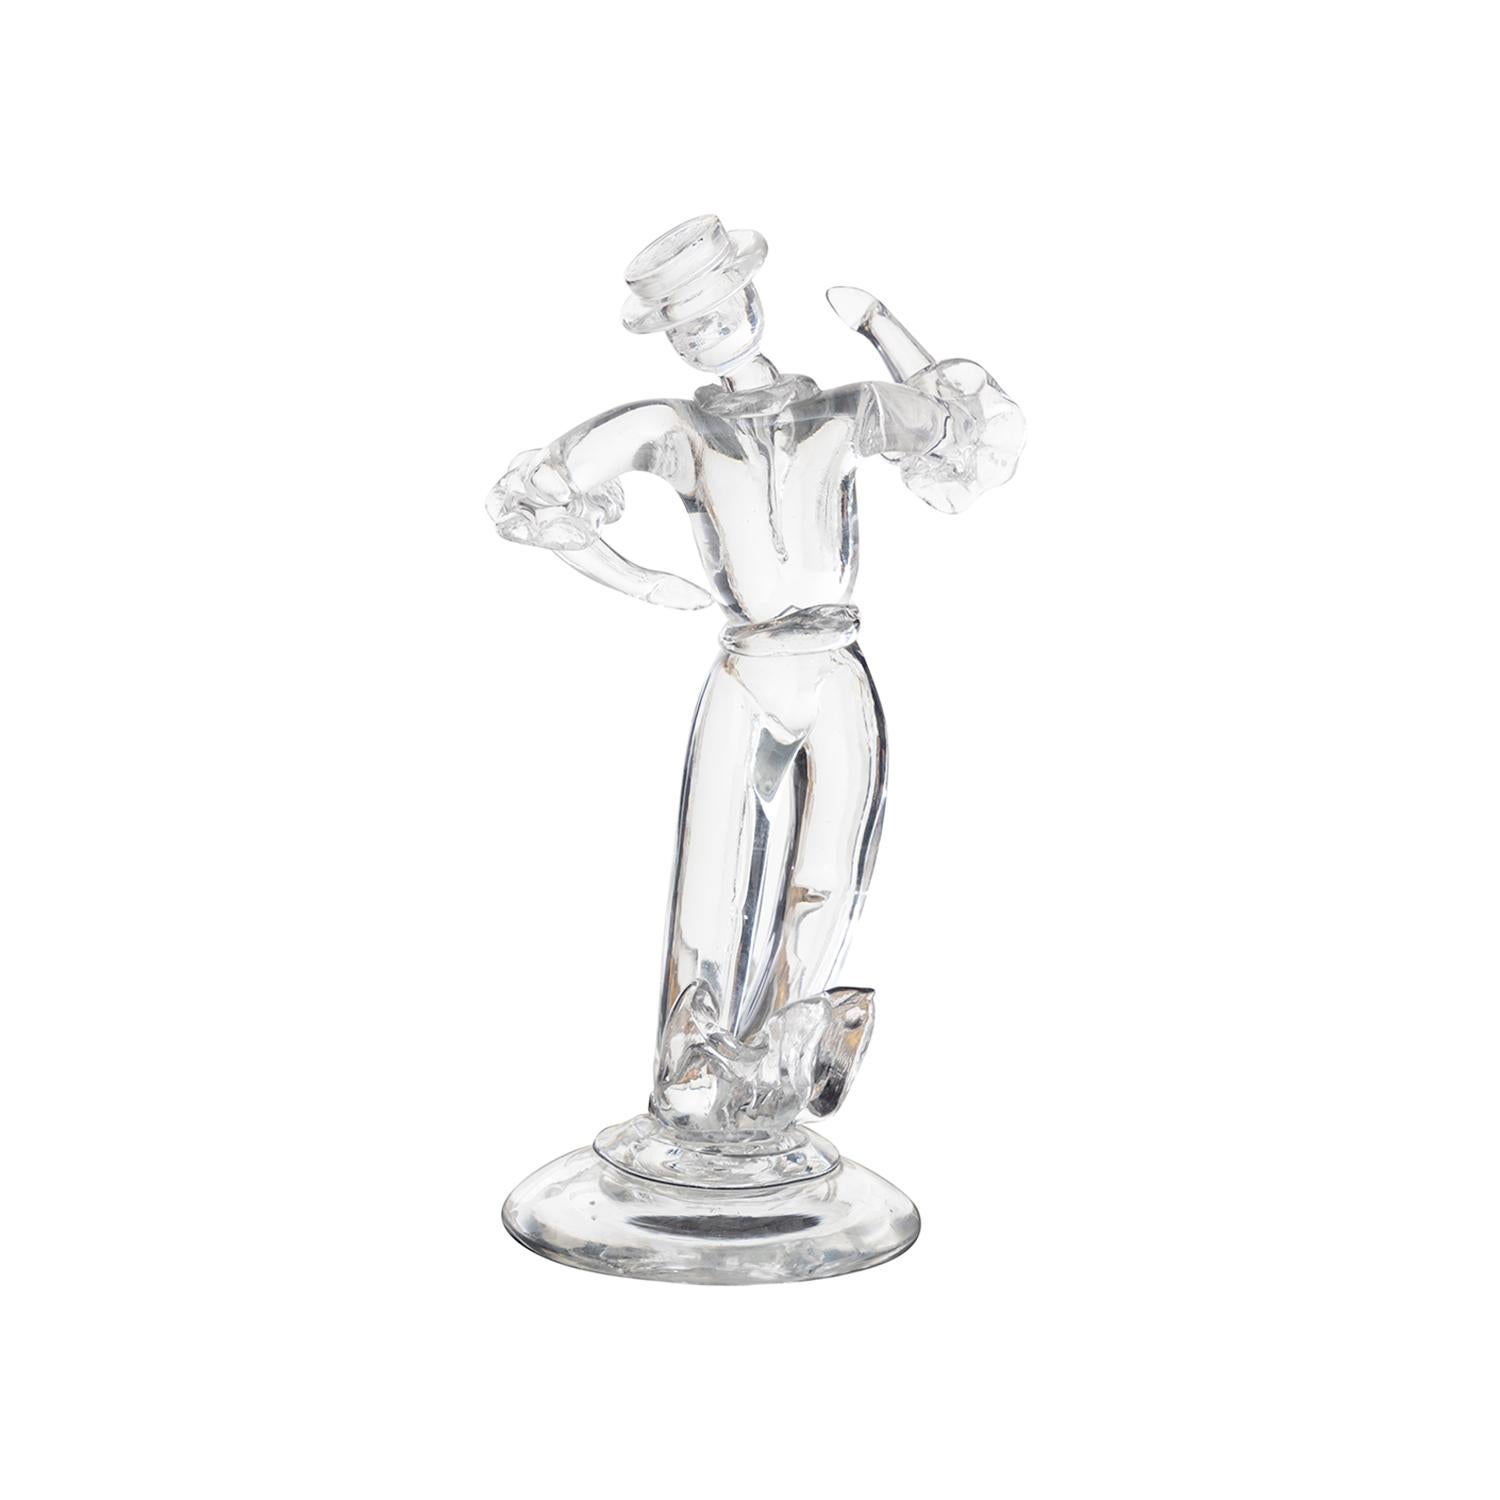 A vintage Mid-Century Modern Italian figure made of hand blown Murano glass, designed by Archimede Seguso and produced by Seguso Vetri D’Arte, in good condition. The clear sculpture is depicting a man in the earlys 20s with a cylinder hat. Wear